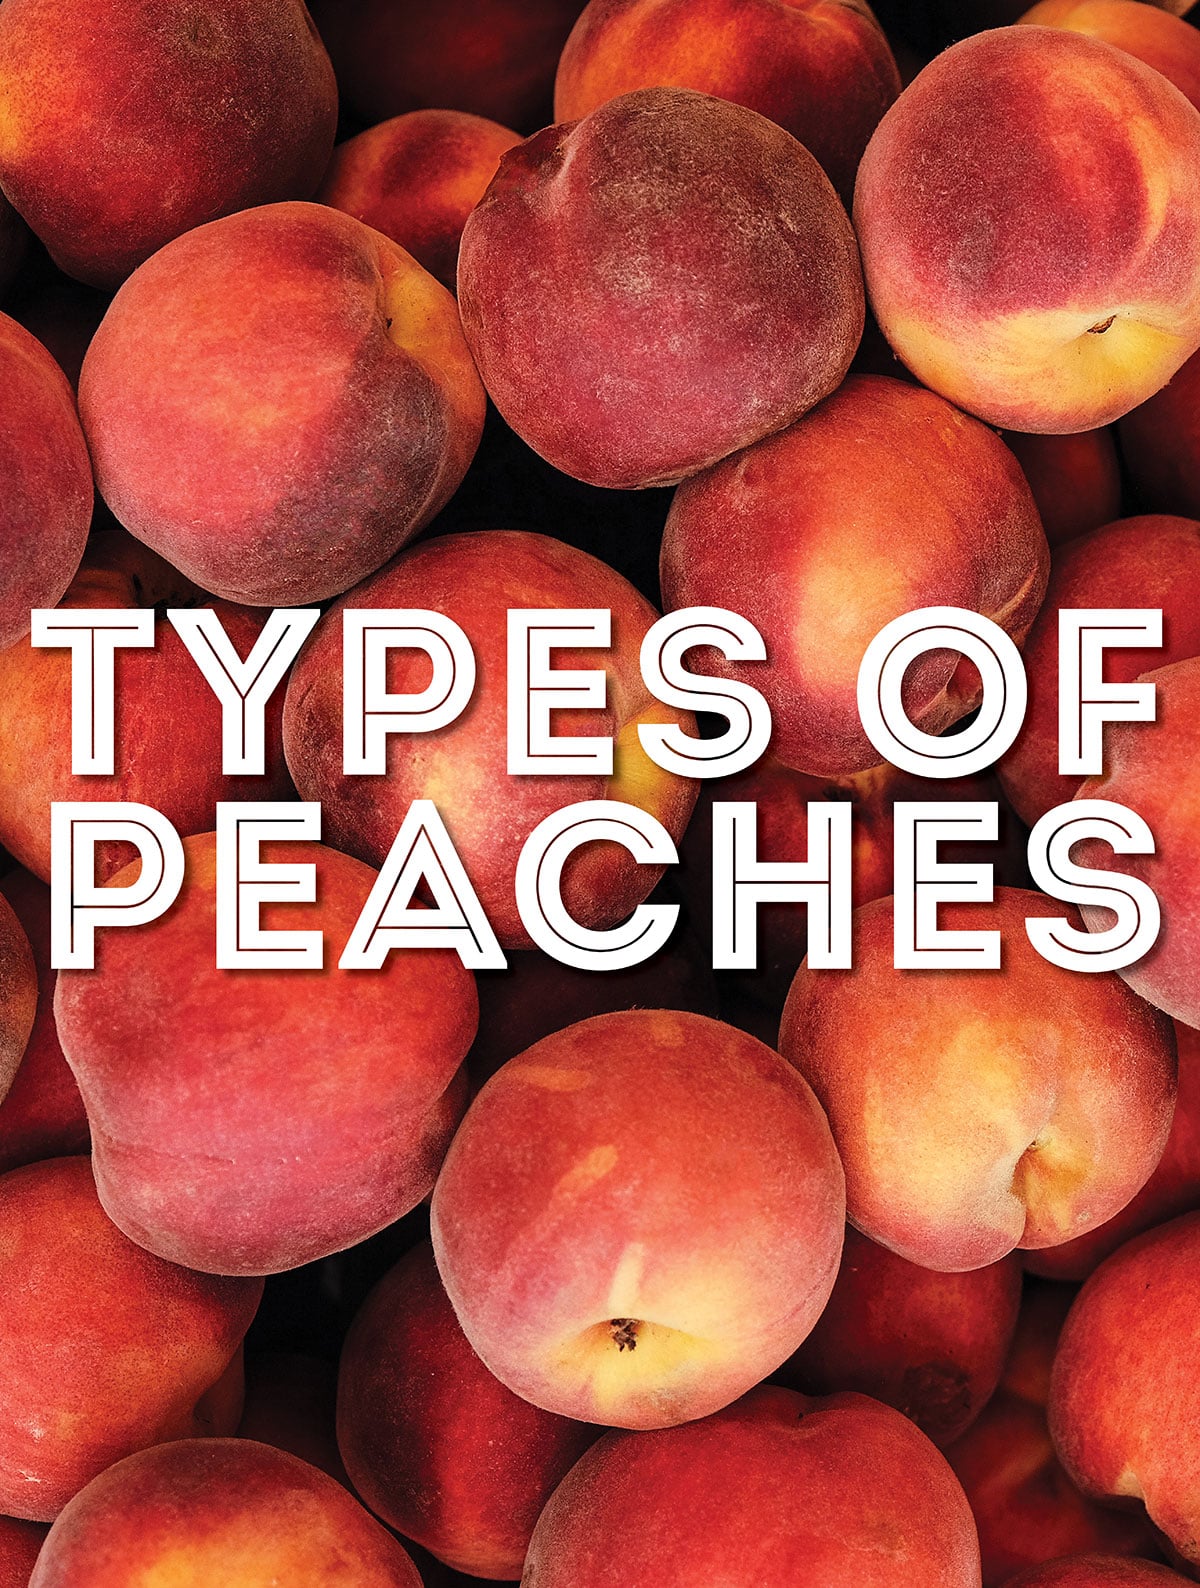 Collage that says "types of peaches".